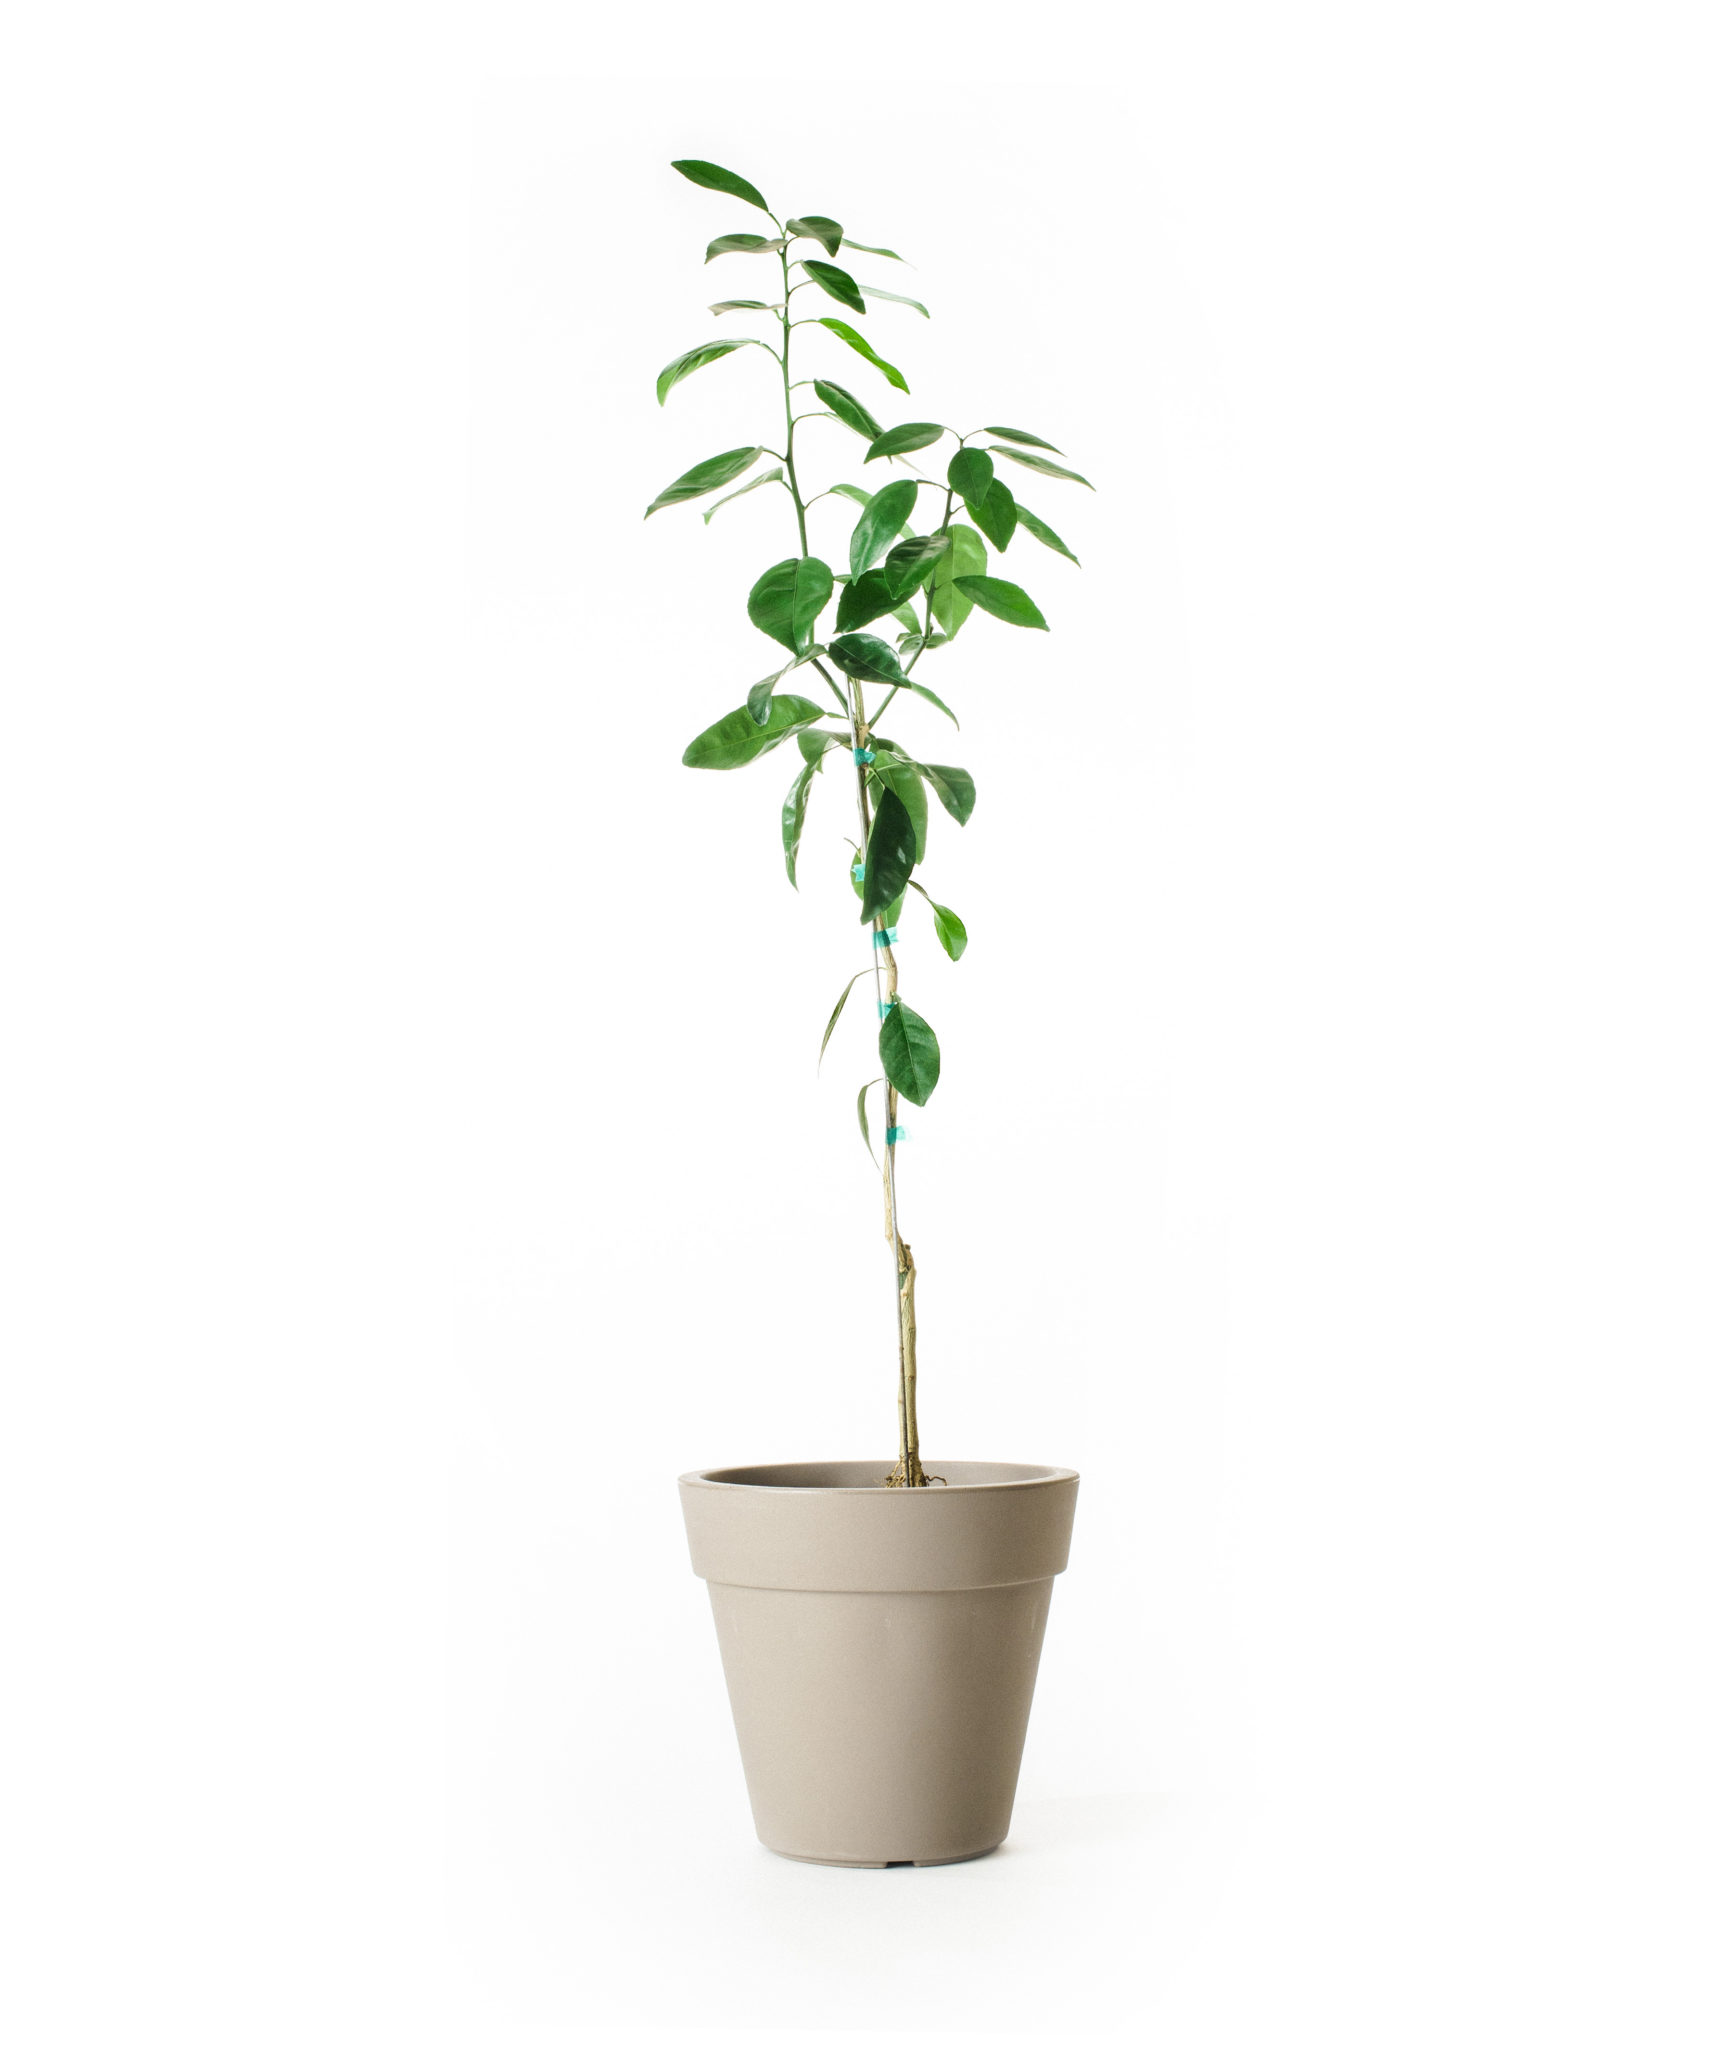 Image of Miho Satsuma Tree (Age: 2 - 3 Years Height: 2 - 3 FT Ship Method: Delivery)